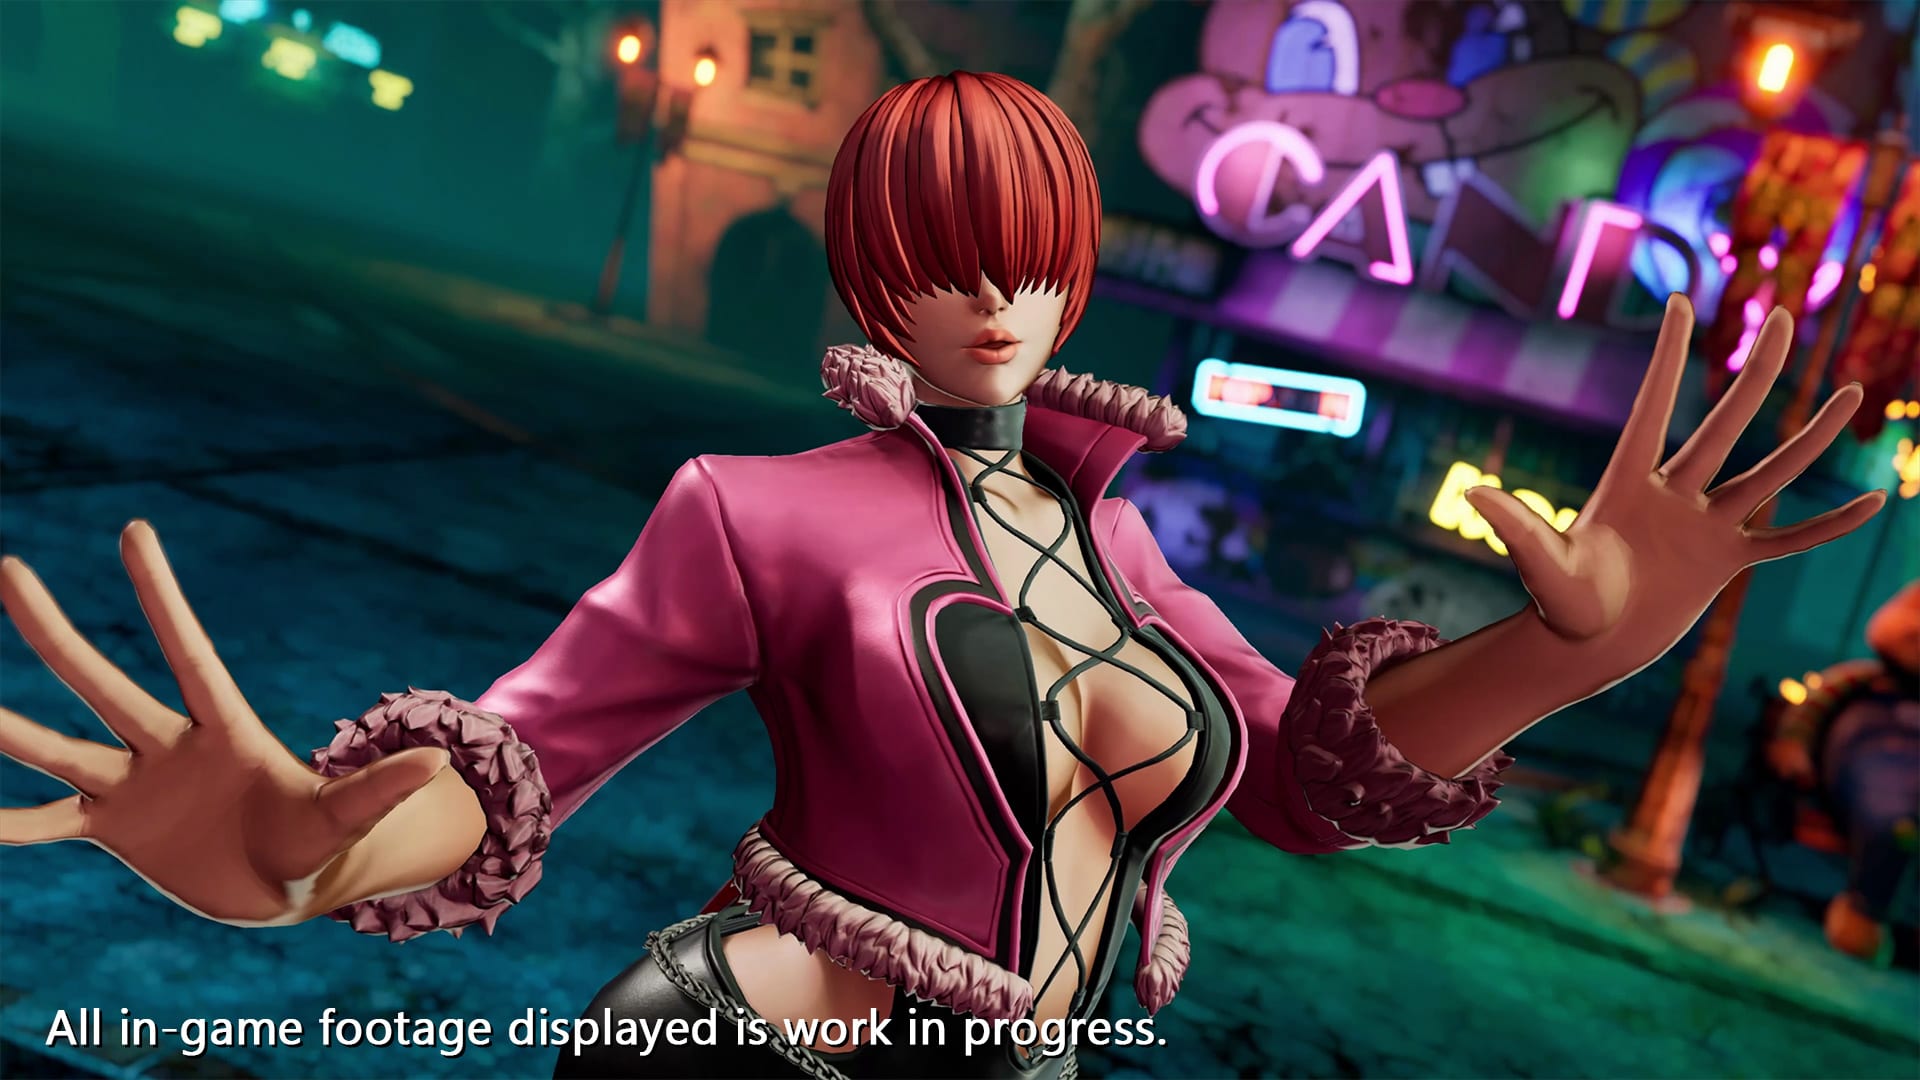 king of fighters shermie